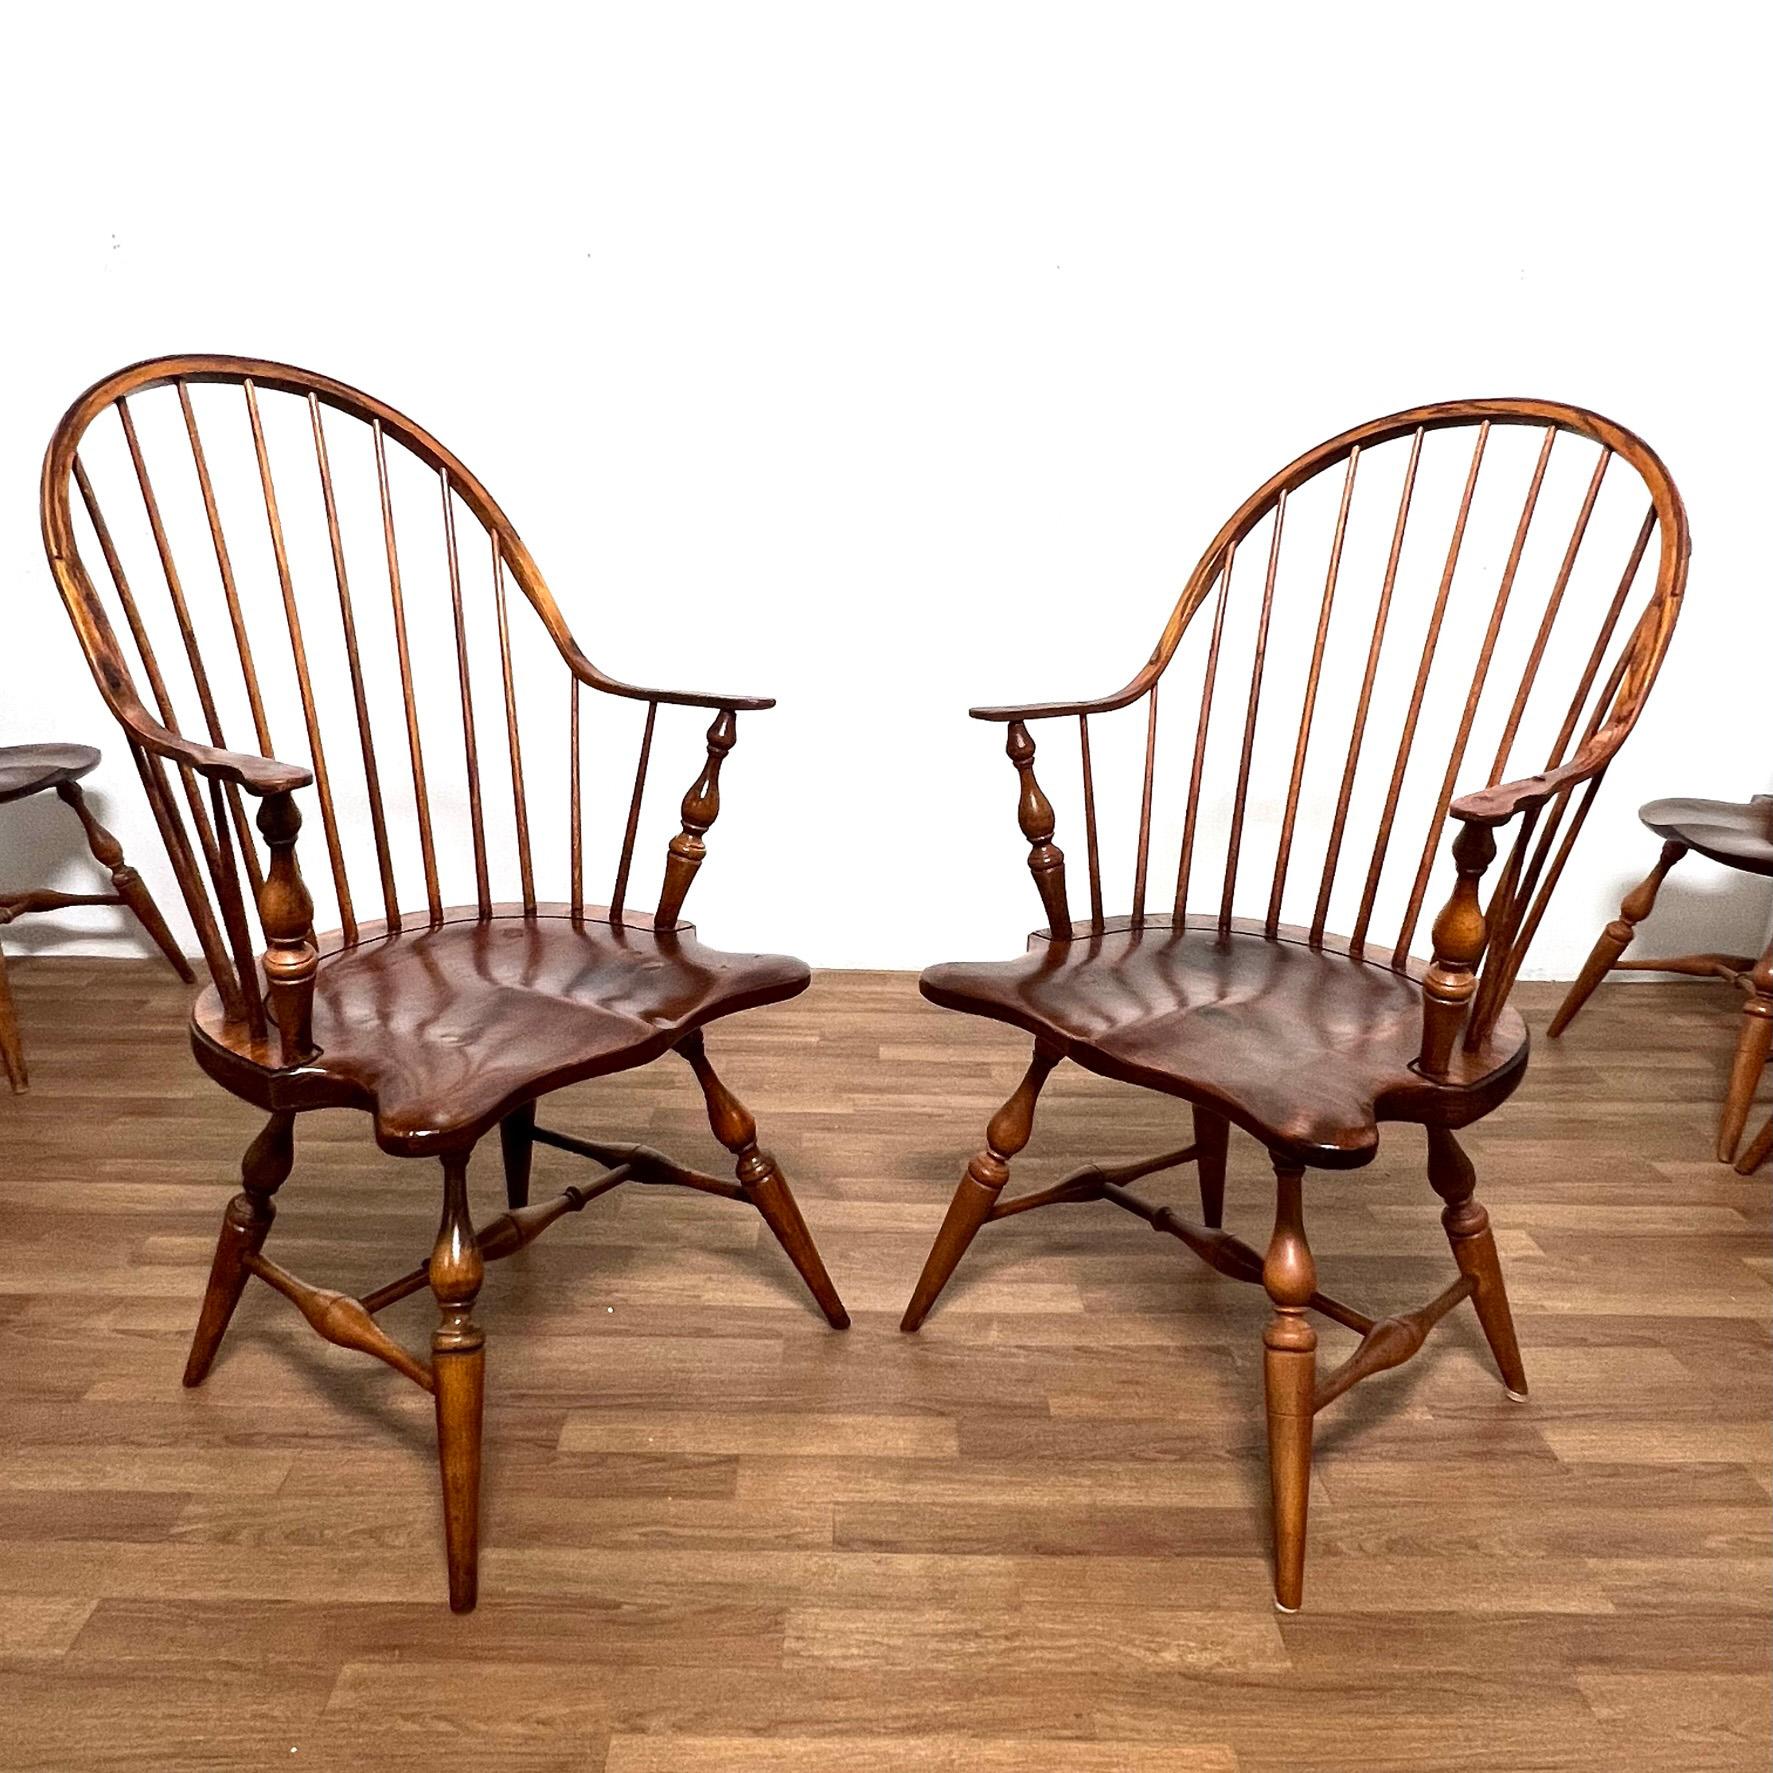 A set of eight handmade artisanal Windsor dining chairs, consisting of six balloon back side chairs and two continuous arm chairs with turned legs and saddle seats.  Purchased by prior owner at the Walker Creek Woodshop in Essex, MA, in the 1980s. 